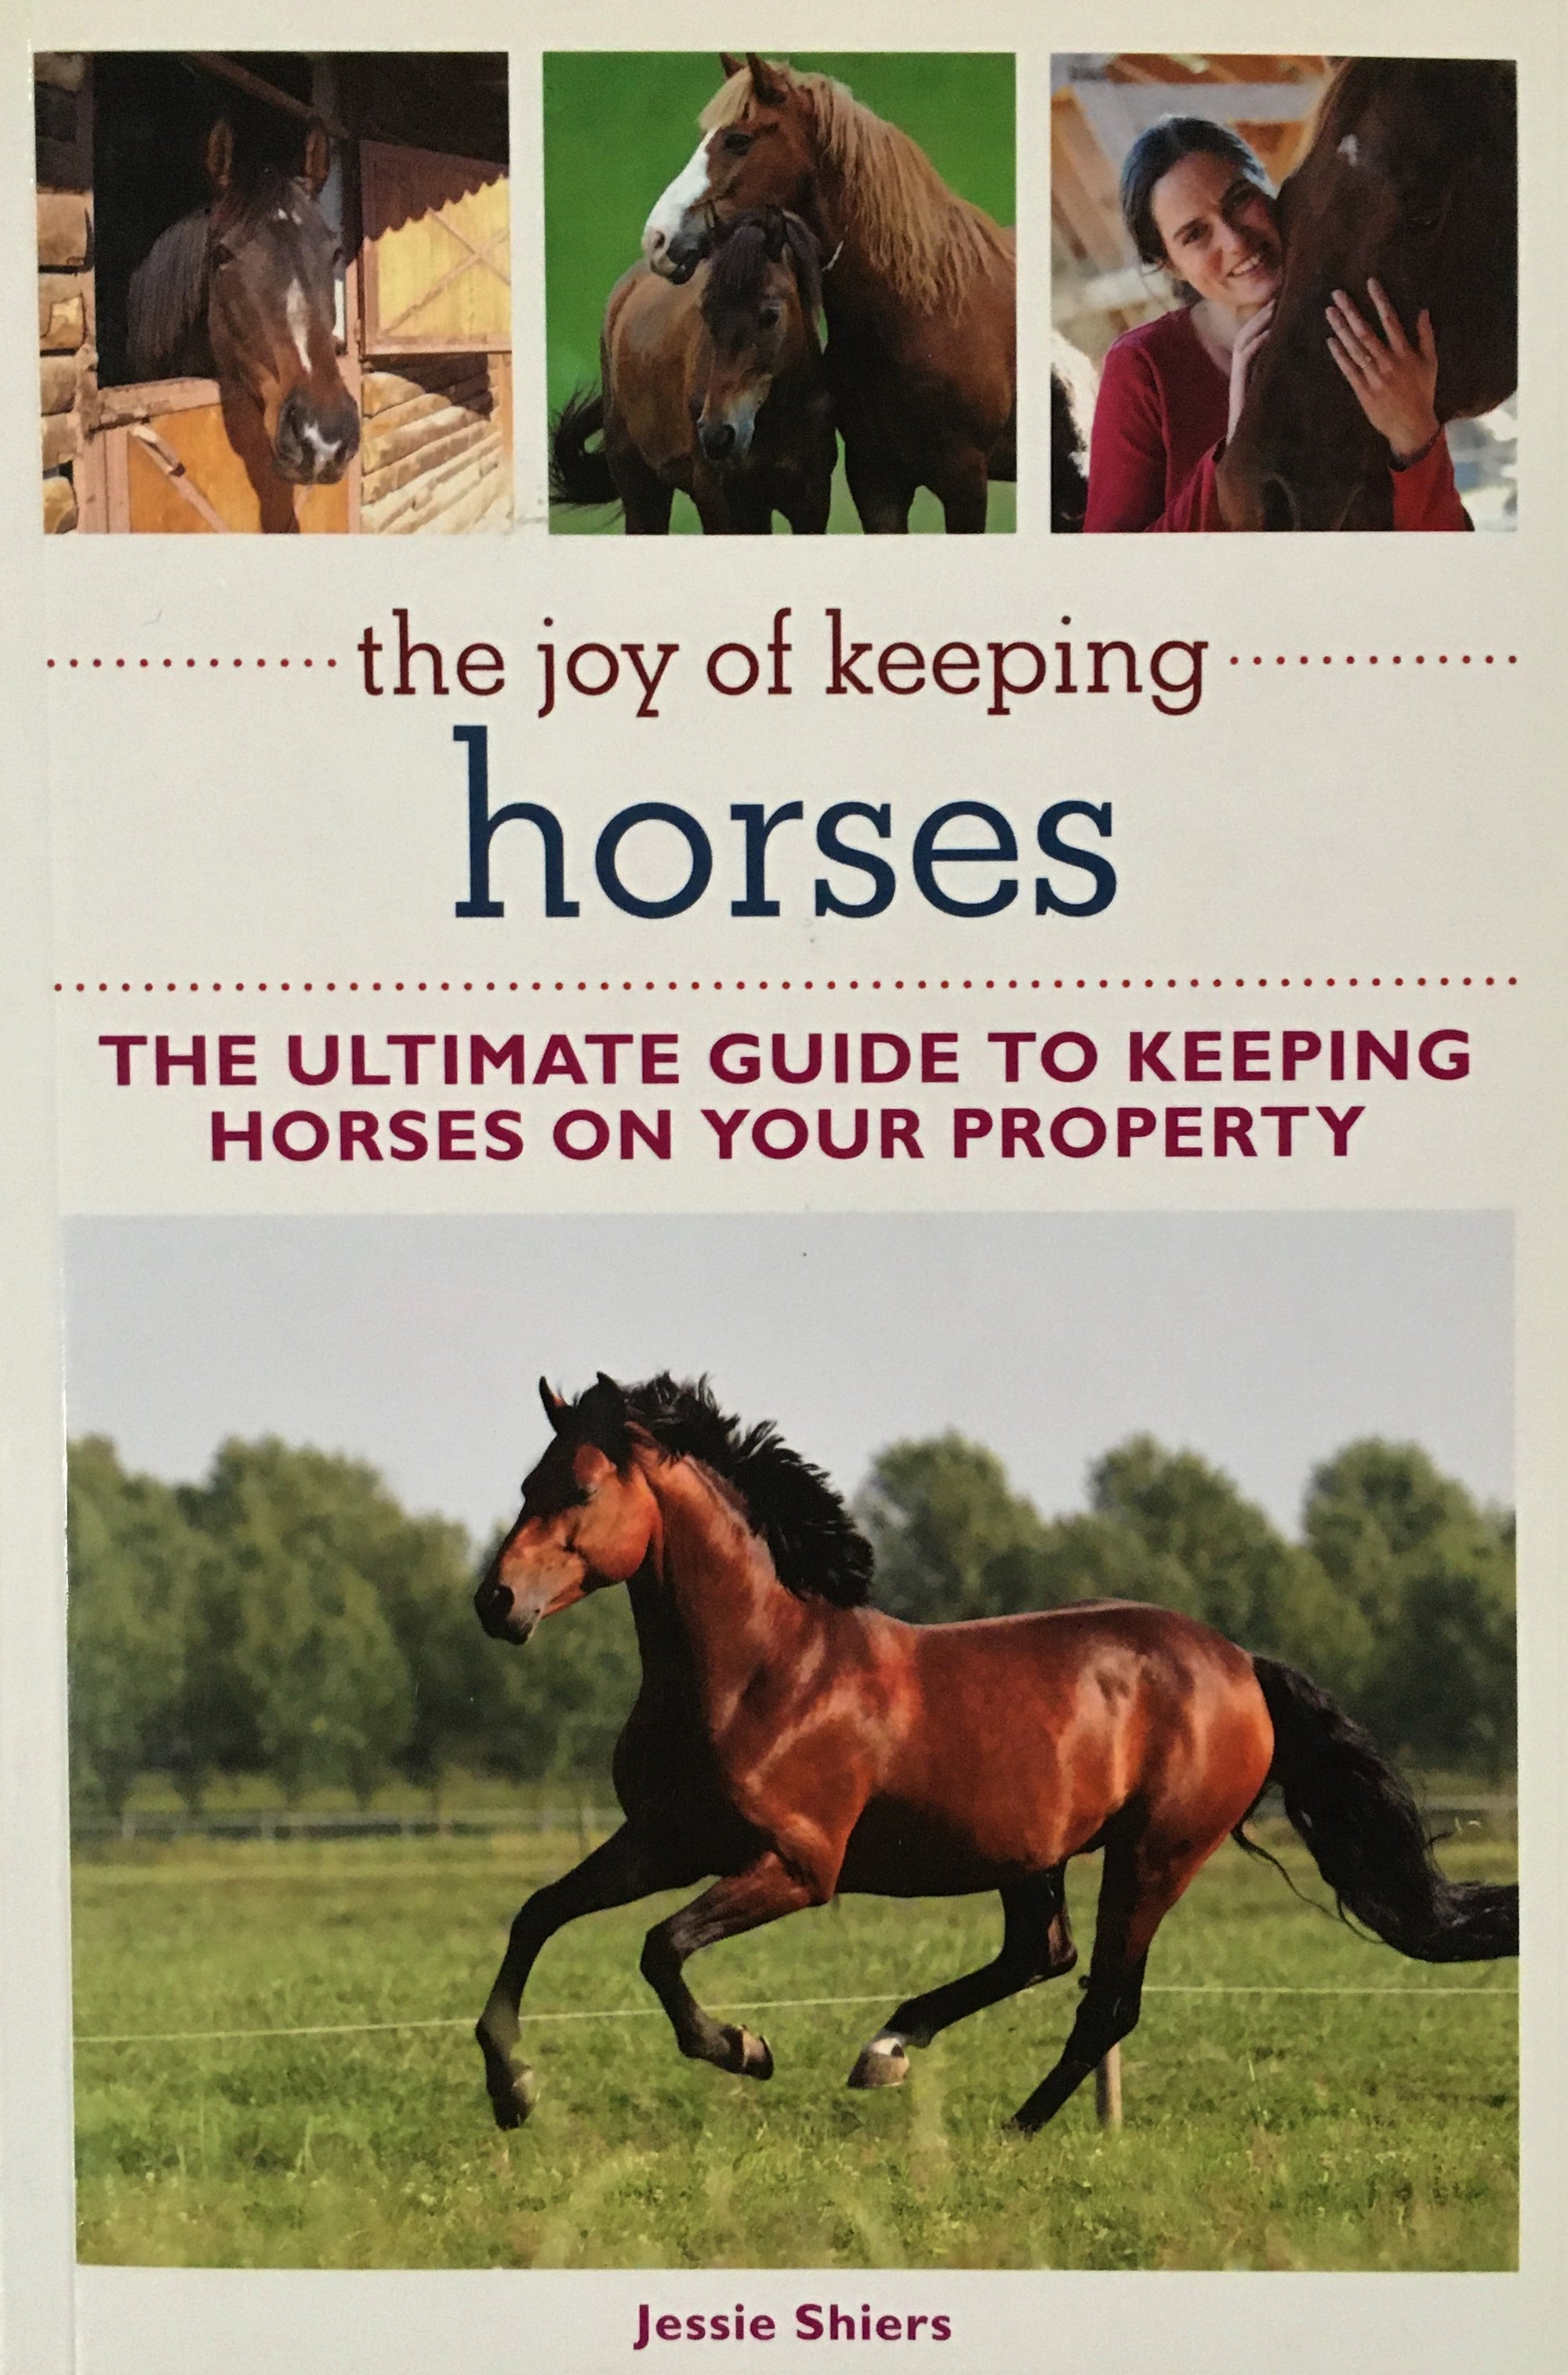 The Joy of Keeping Horses by Jessie Shiers Book Cover